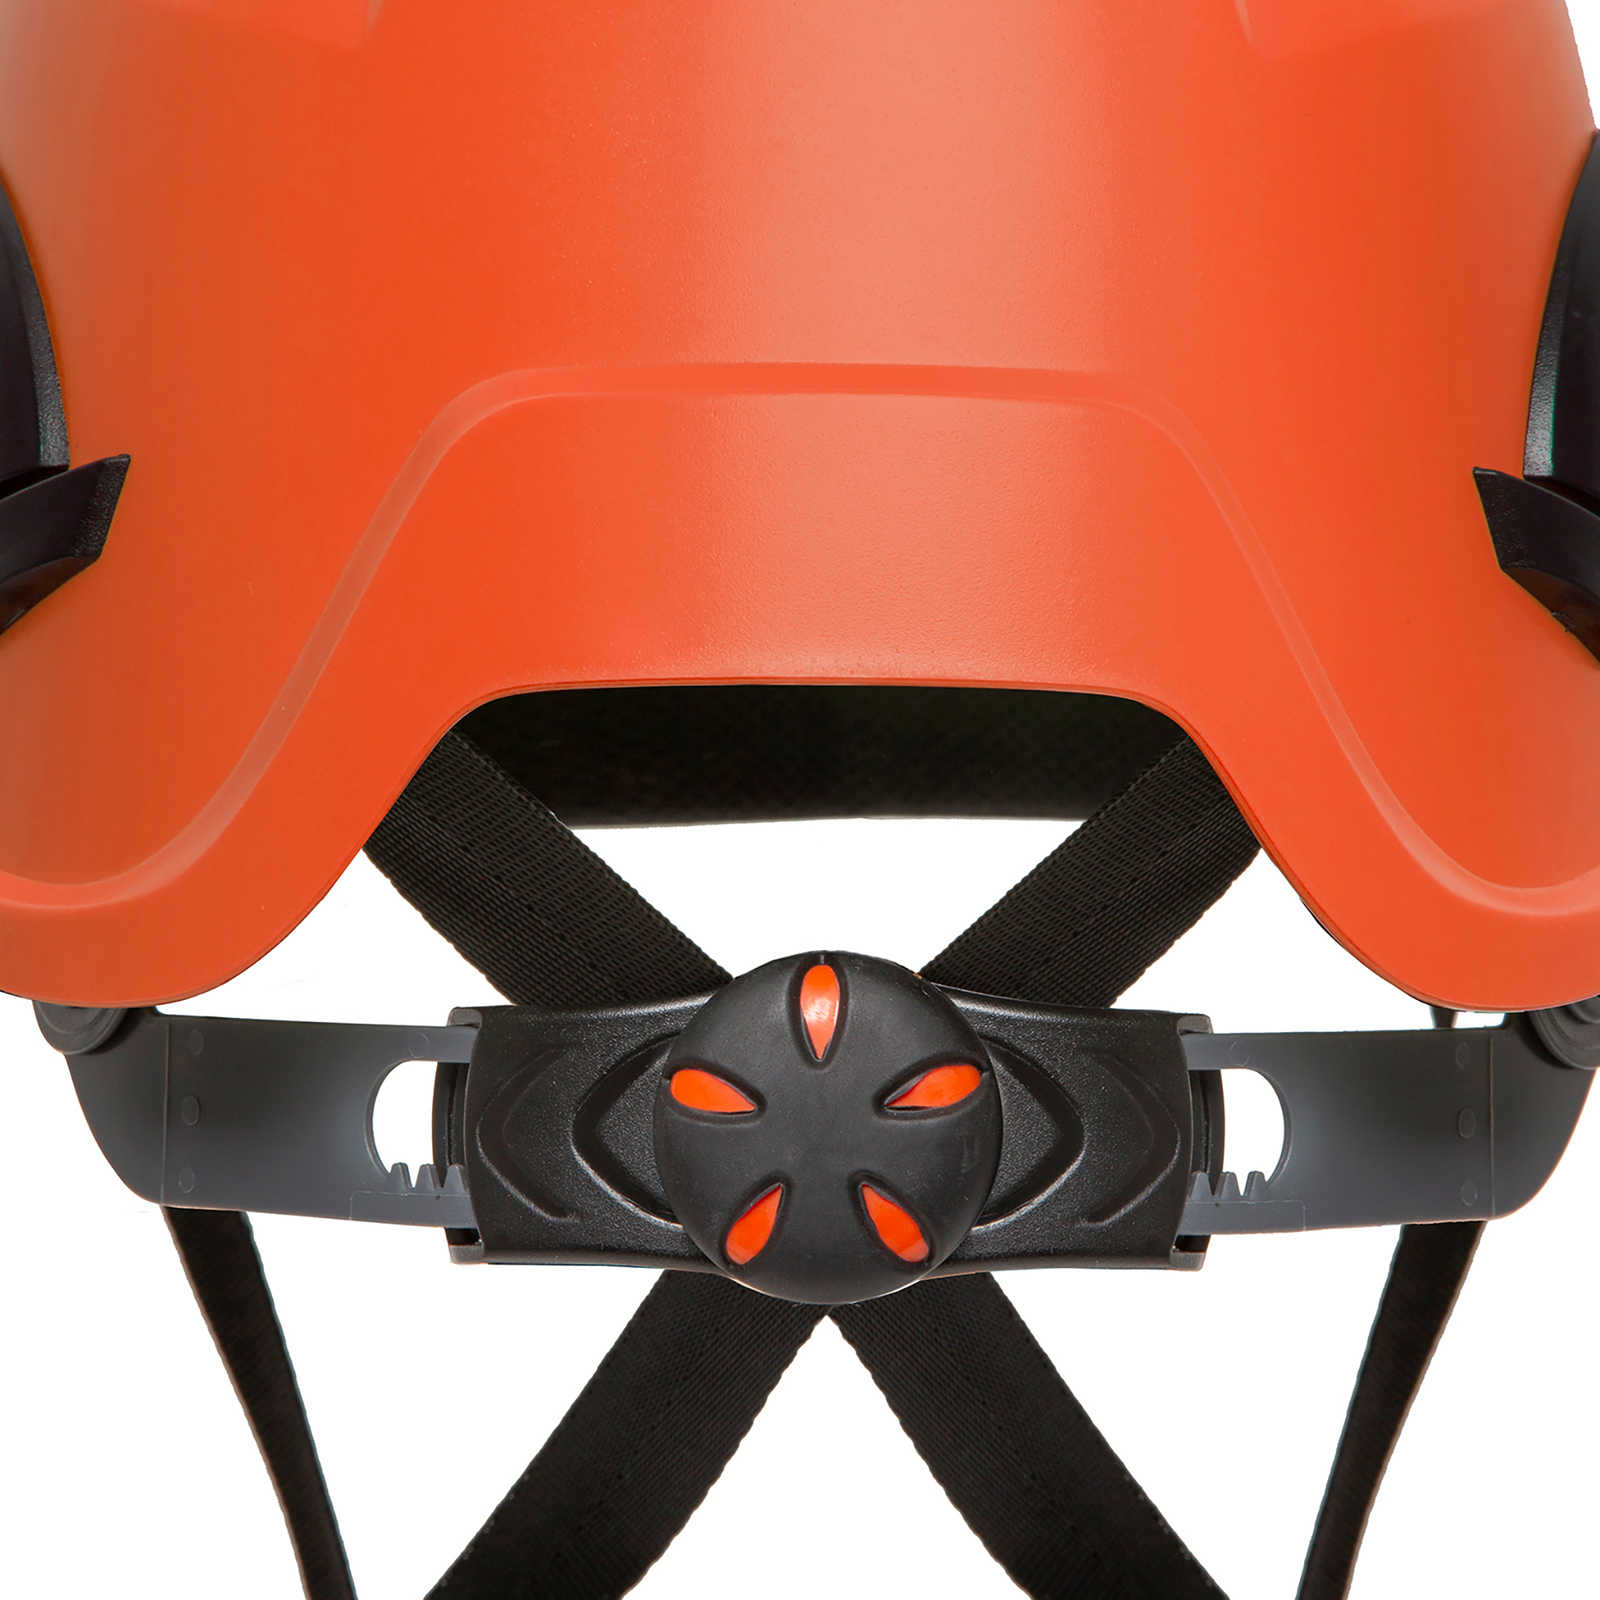 Close up to show the black ratchet mechanism of the JORESTECH hard hat with 4 suspension points